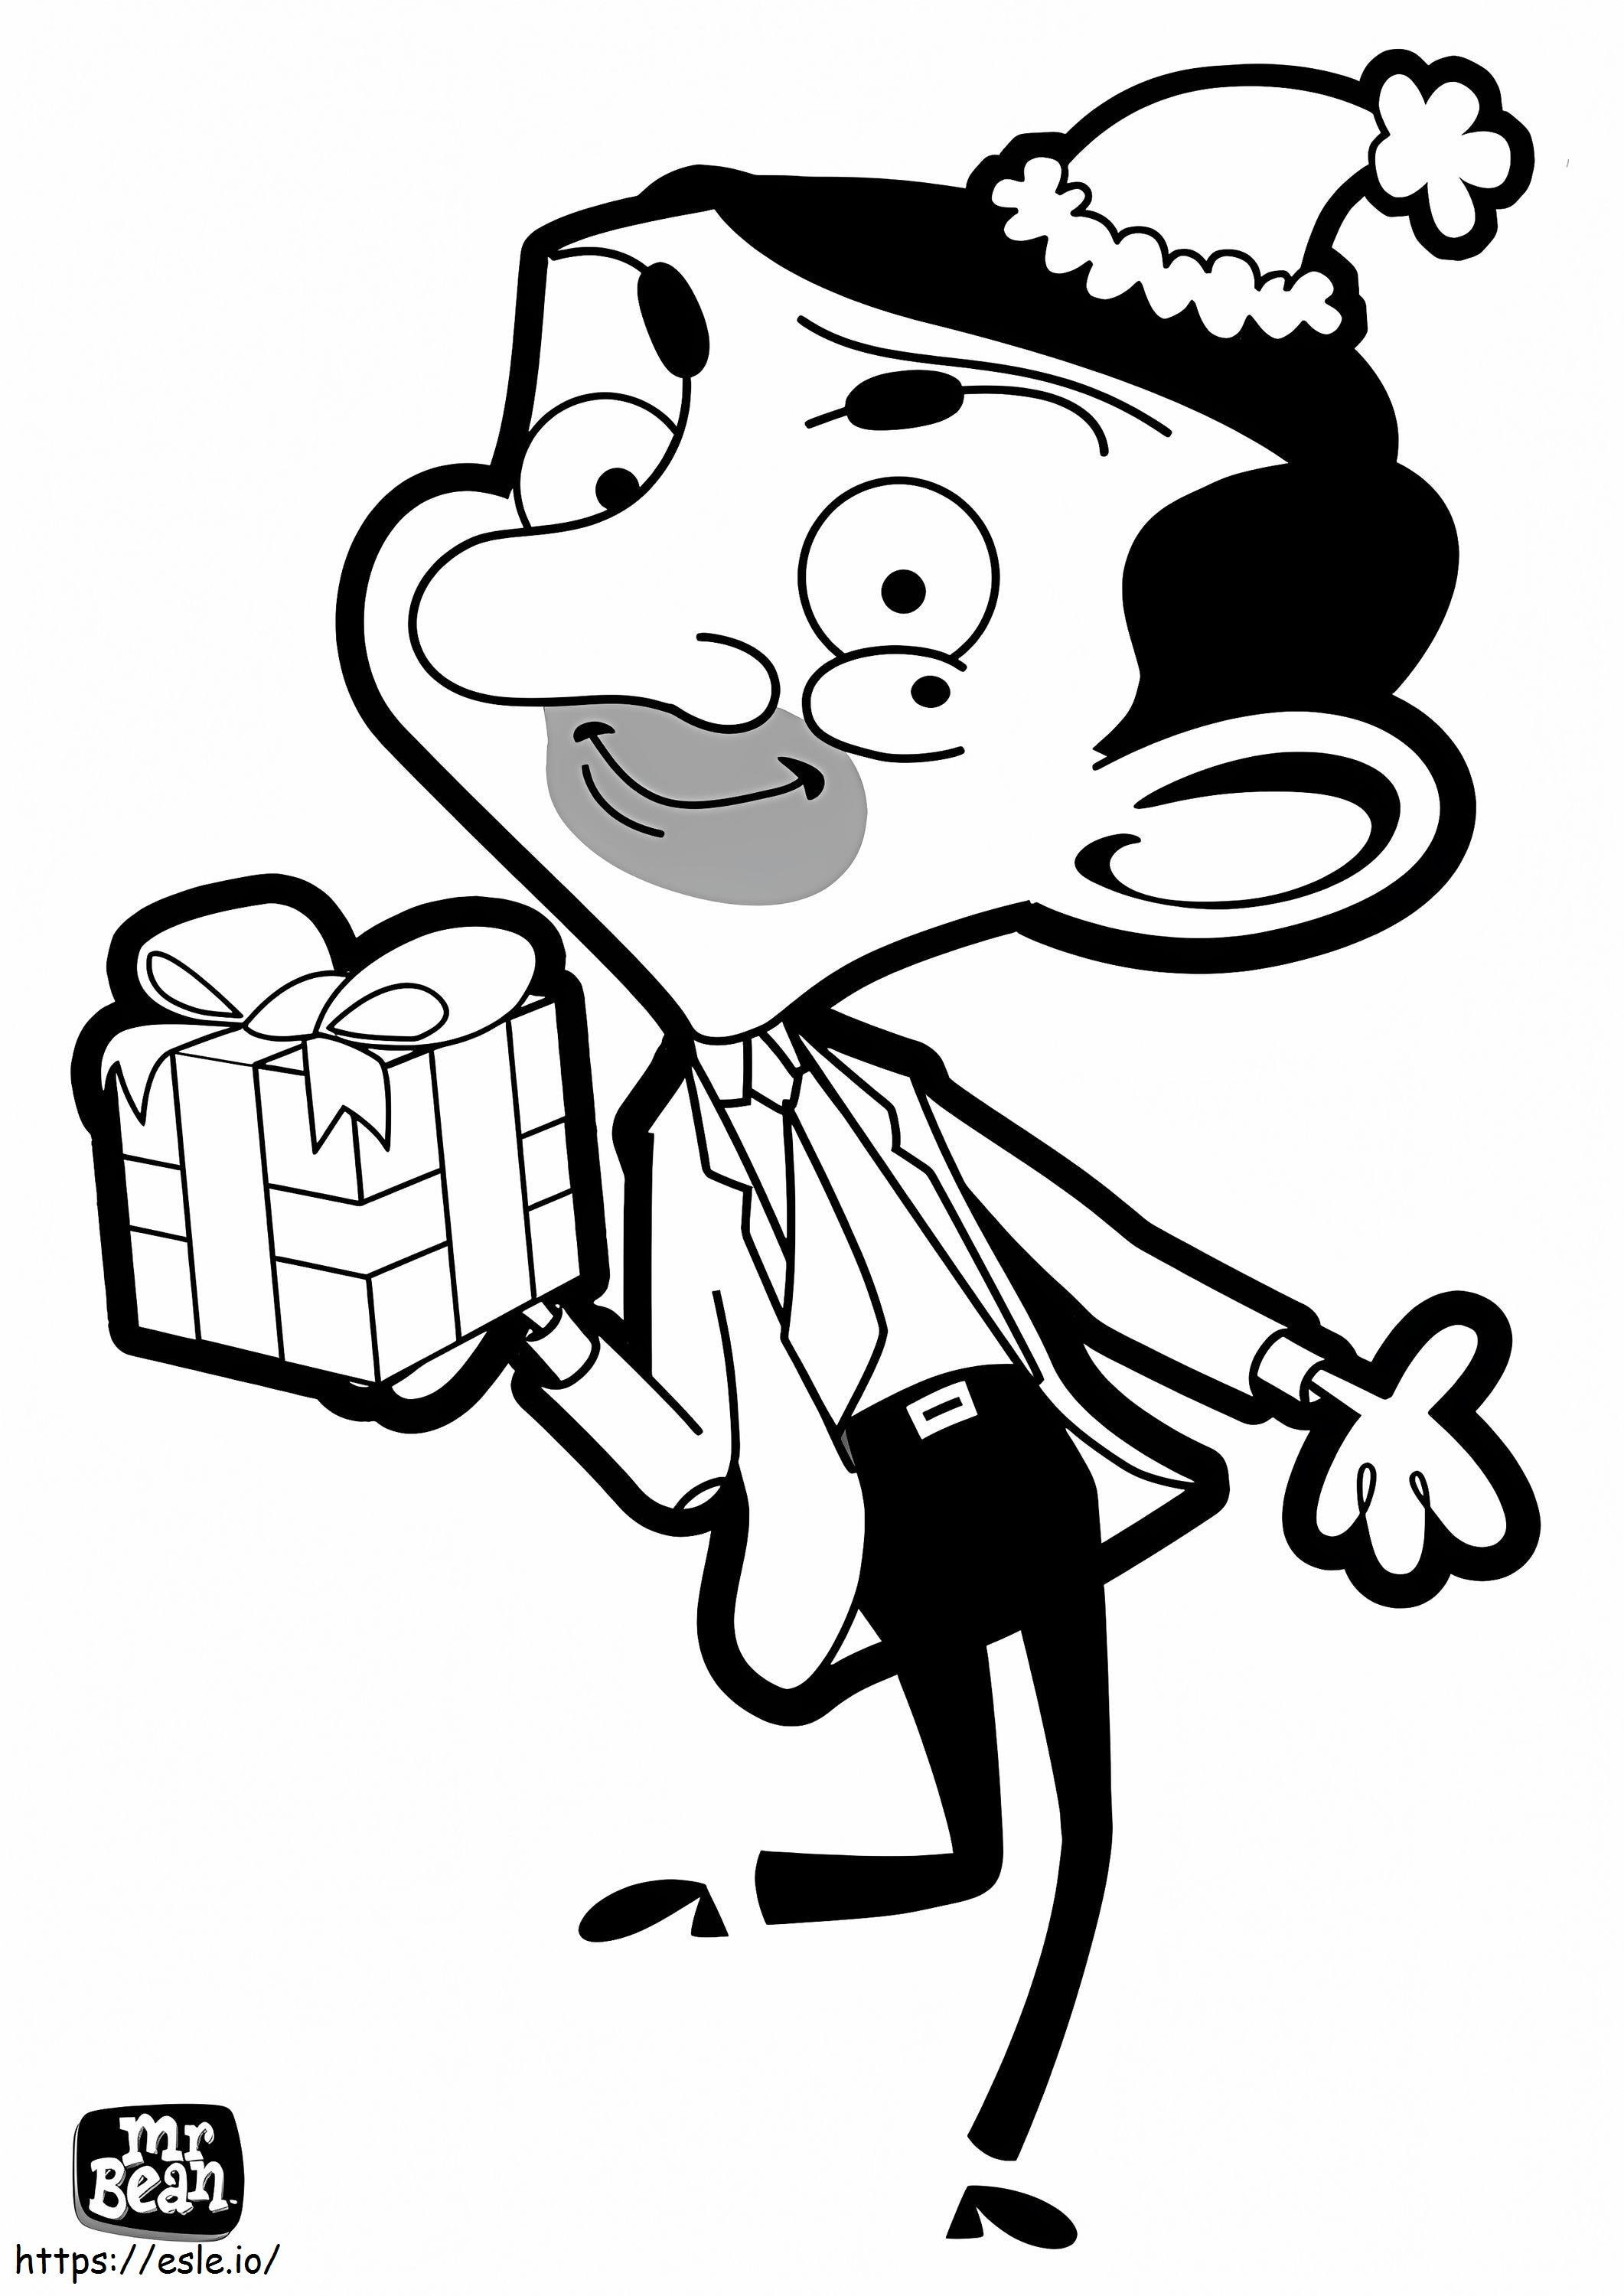 1531708283 Mr Bean With Gift A4 coloring page